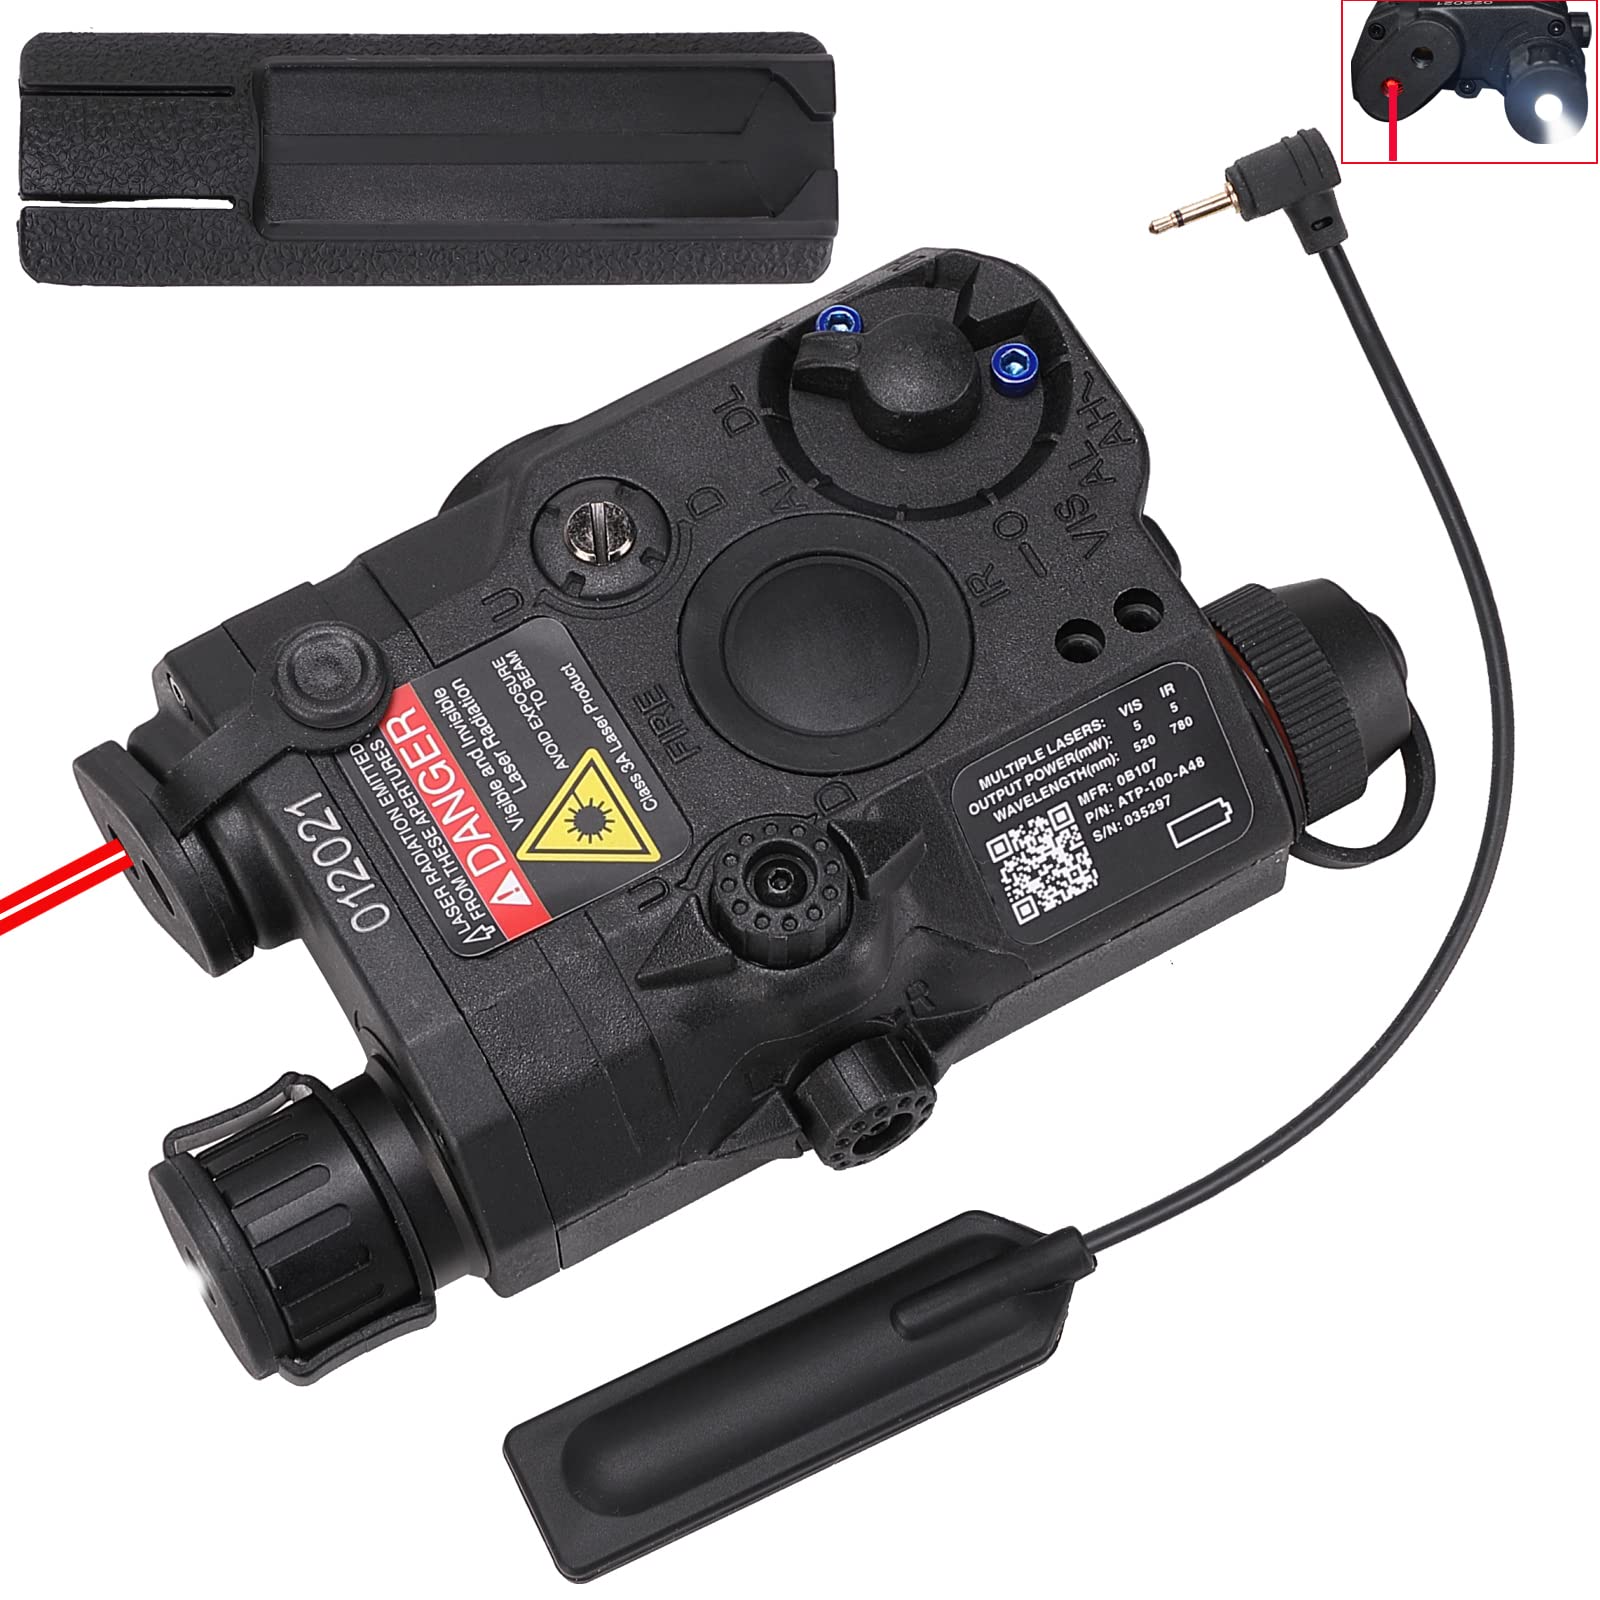 Ratulie Upgraded Airsoft PEQ 15 PEQ Box IR Laser with Visable Red